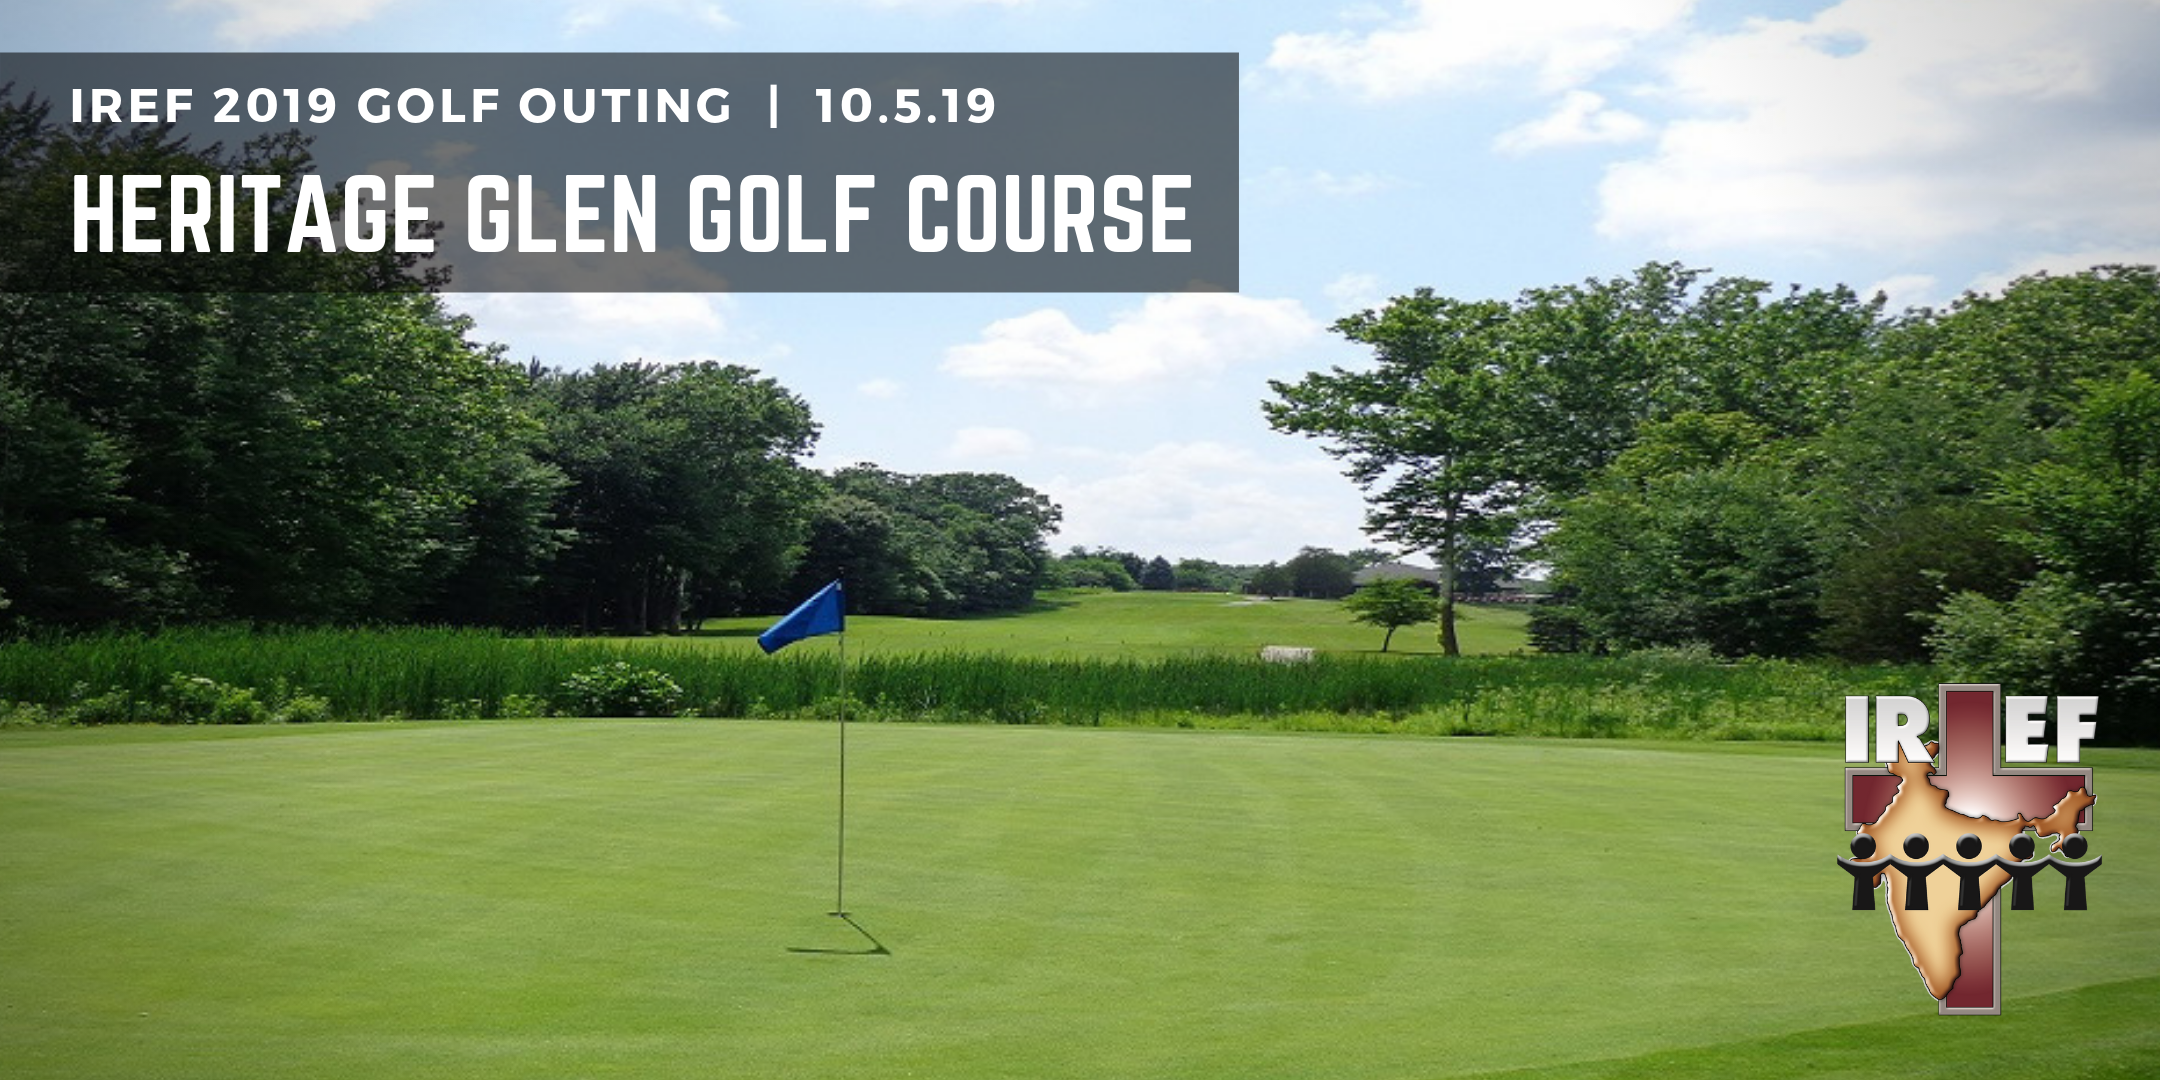 IREF's First Annual Michigan Golf Outing